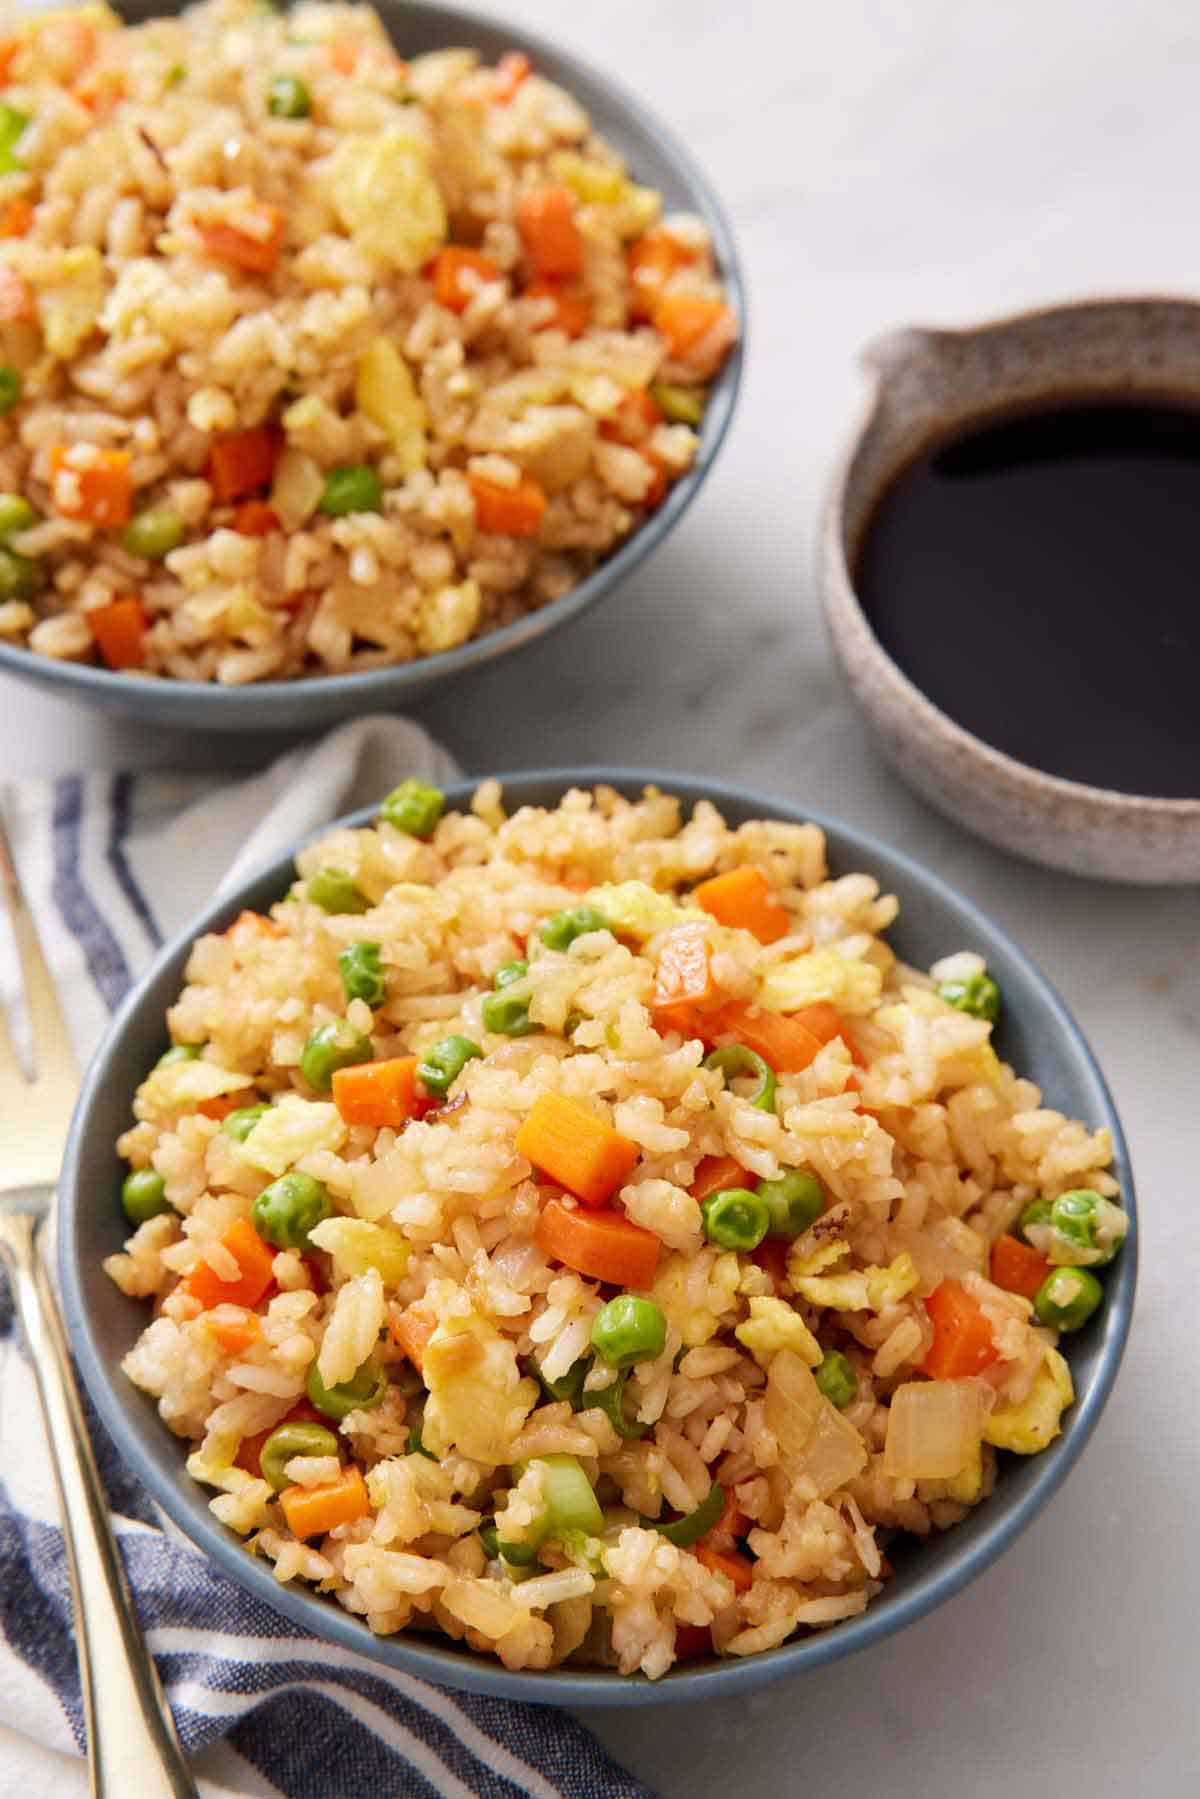 Two bowls of fried rice with a bowl of sauce off to the side.